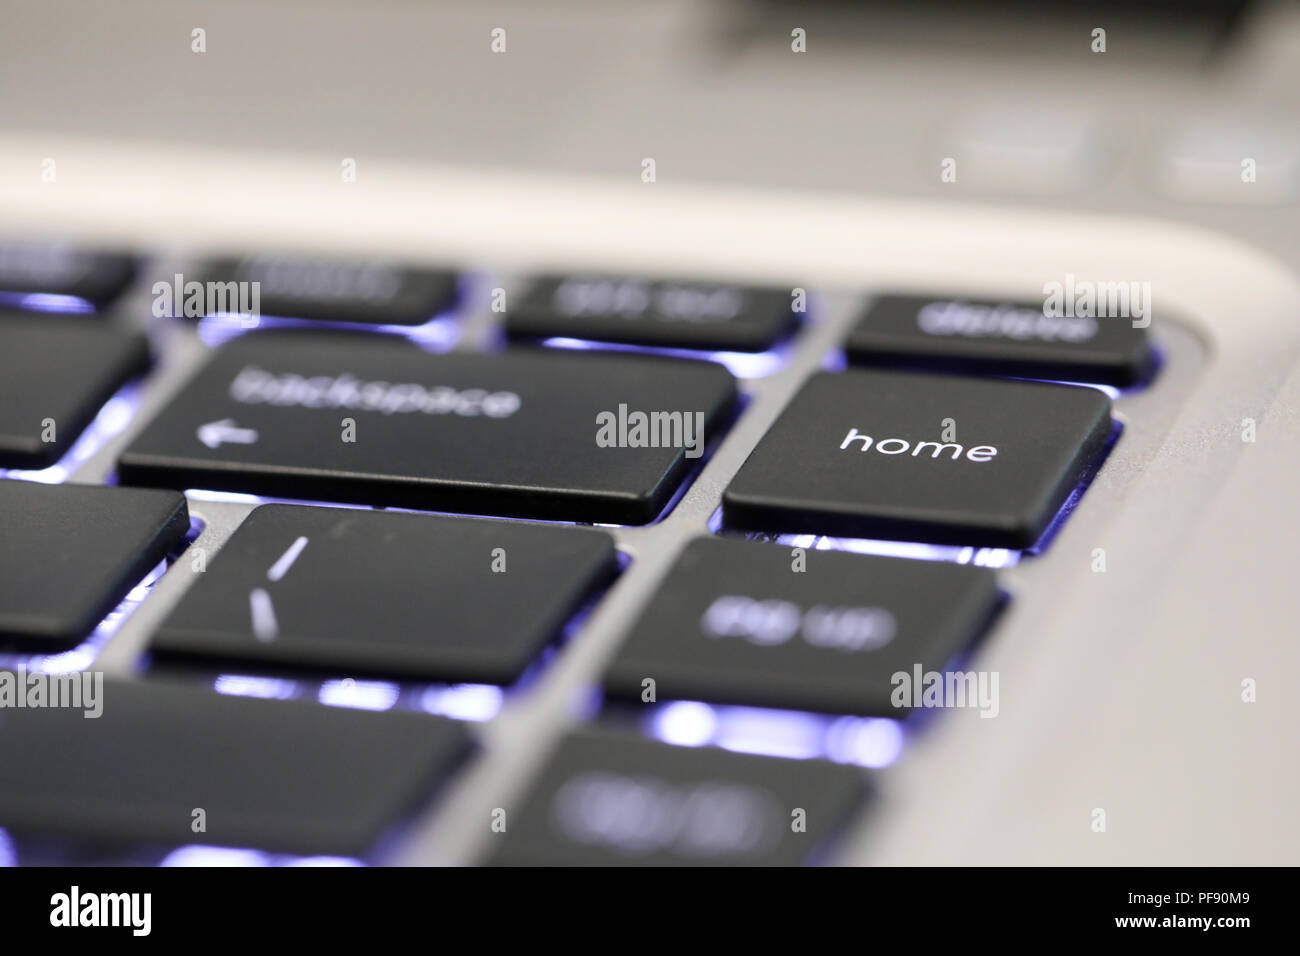 close up of the special computer key board button home. illuminated contemporary modern keyboard character. Stock Photo